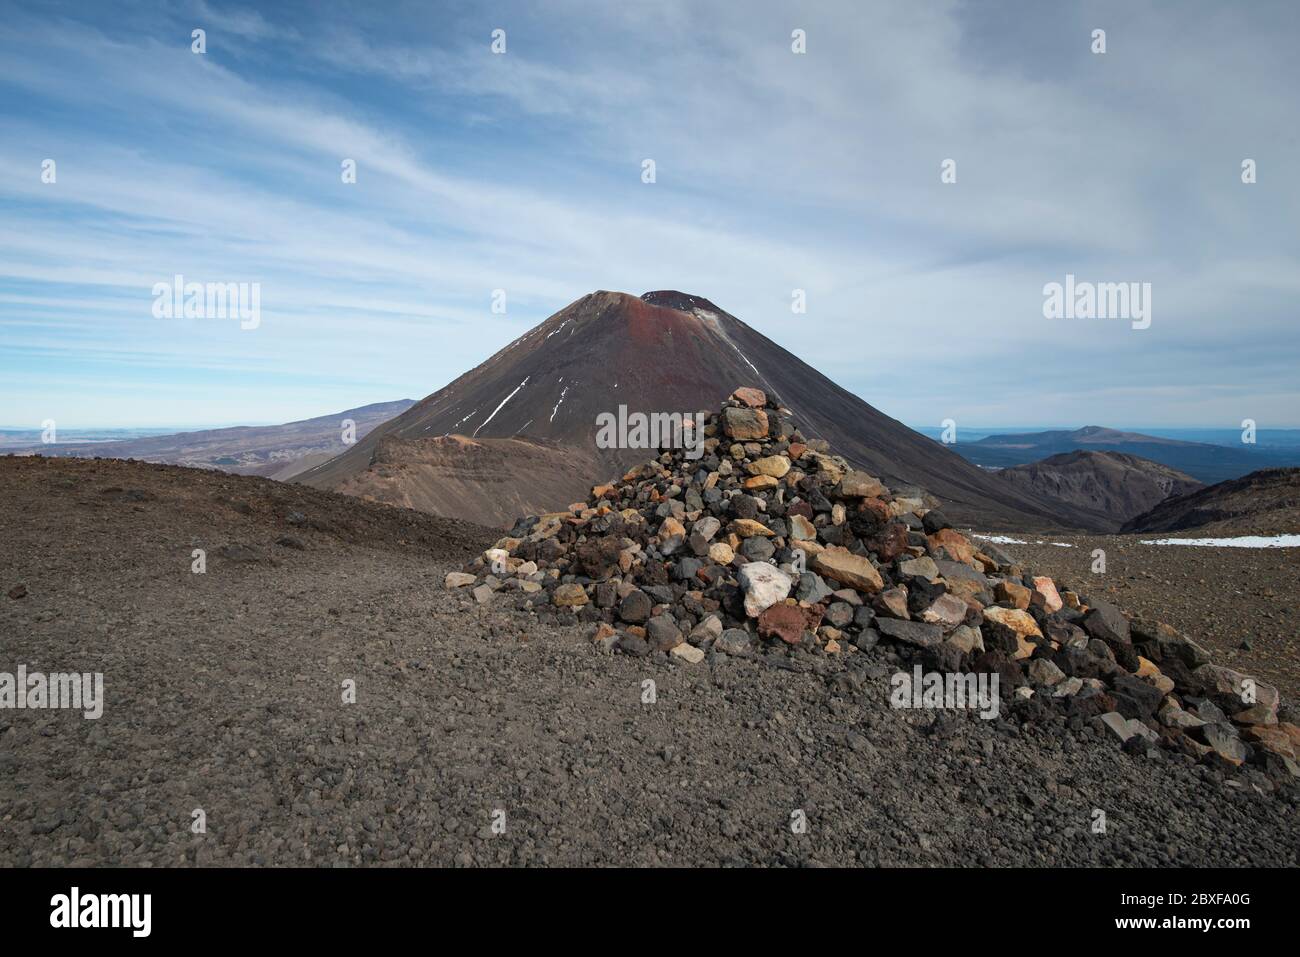 View of Mount Ngauruhoe with a pile of rocks in the foreground on the Tongariro Alpine Crossing Stock Photo